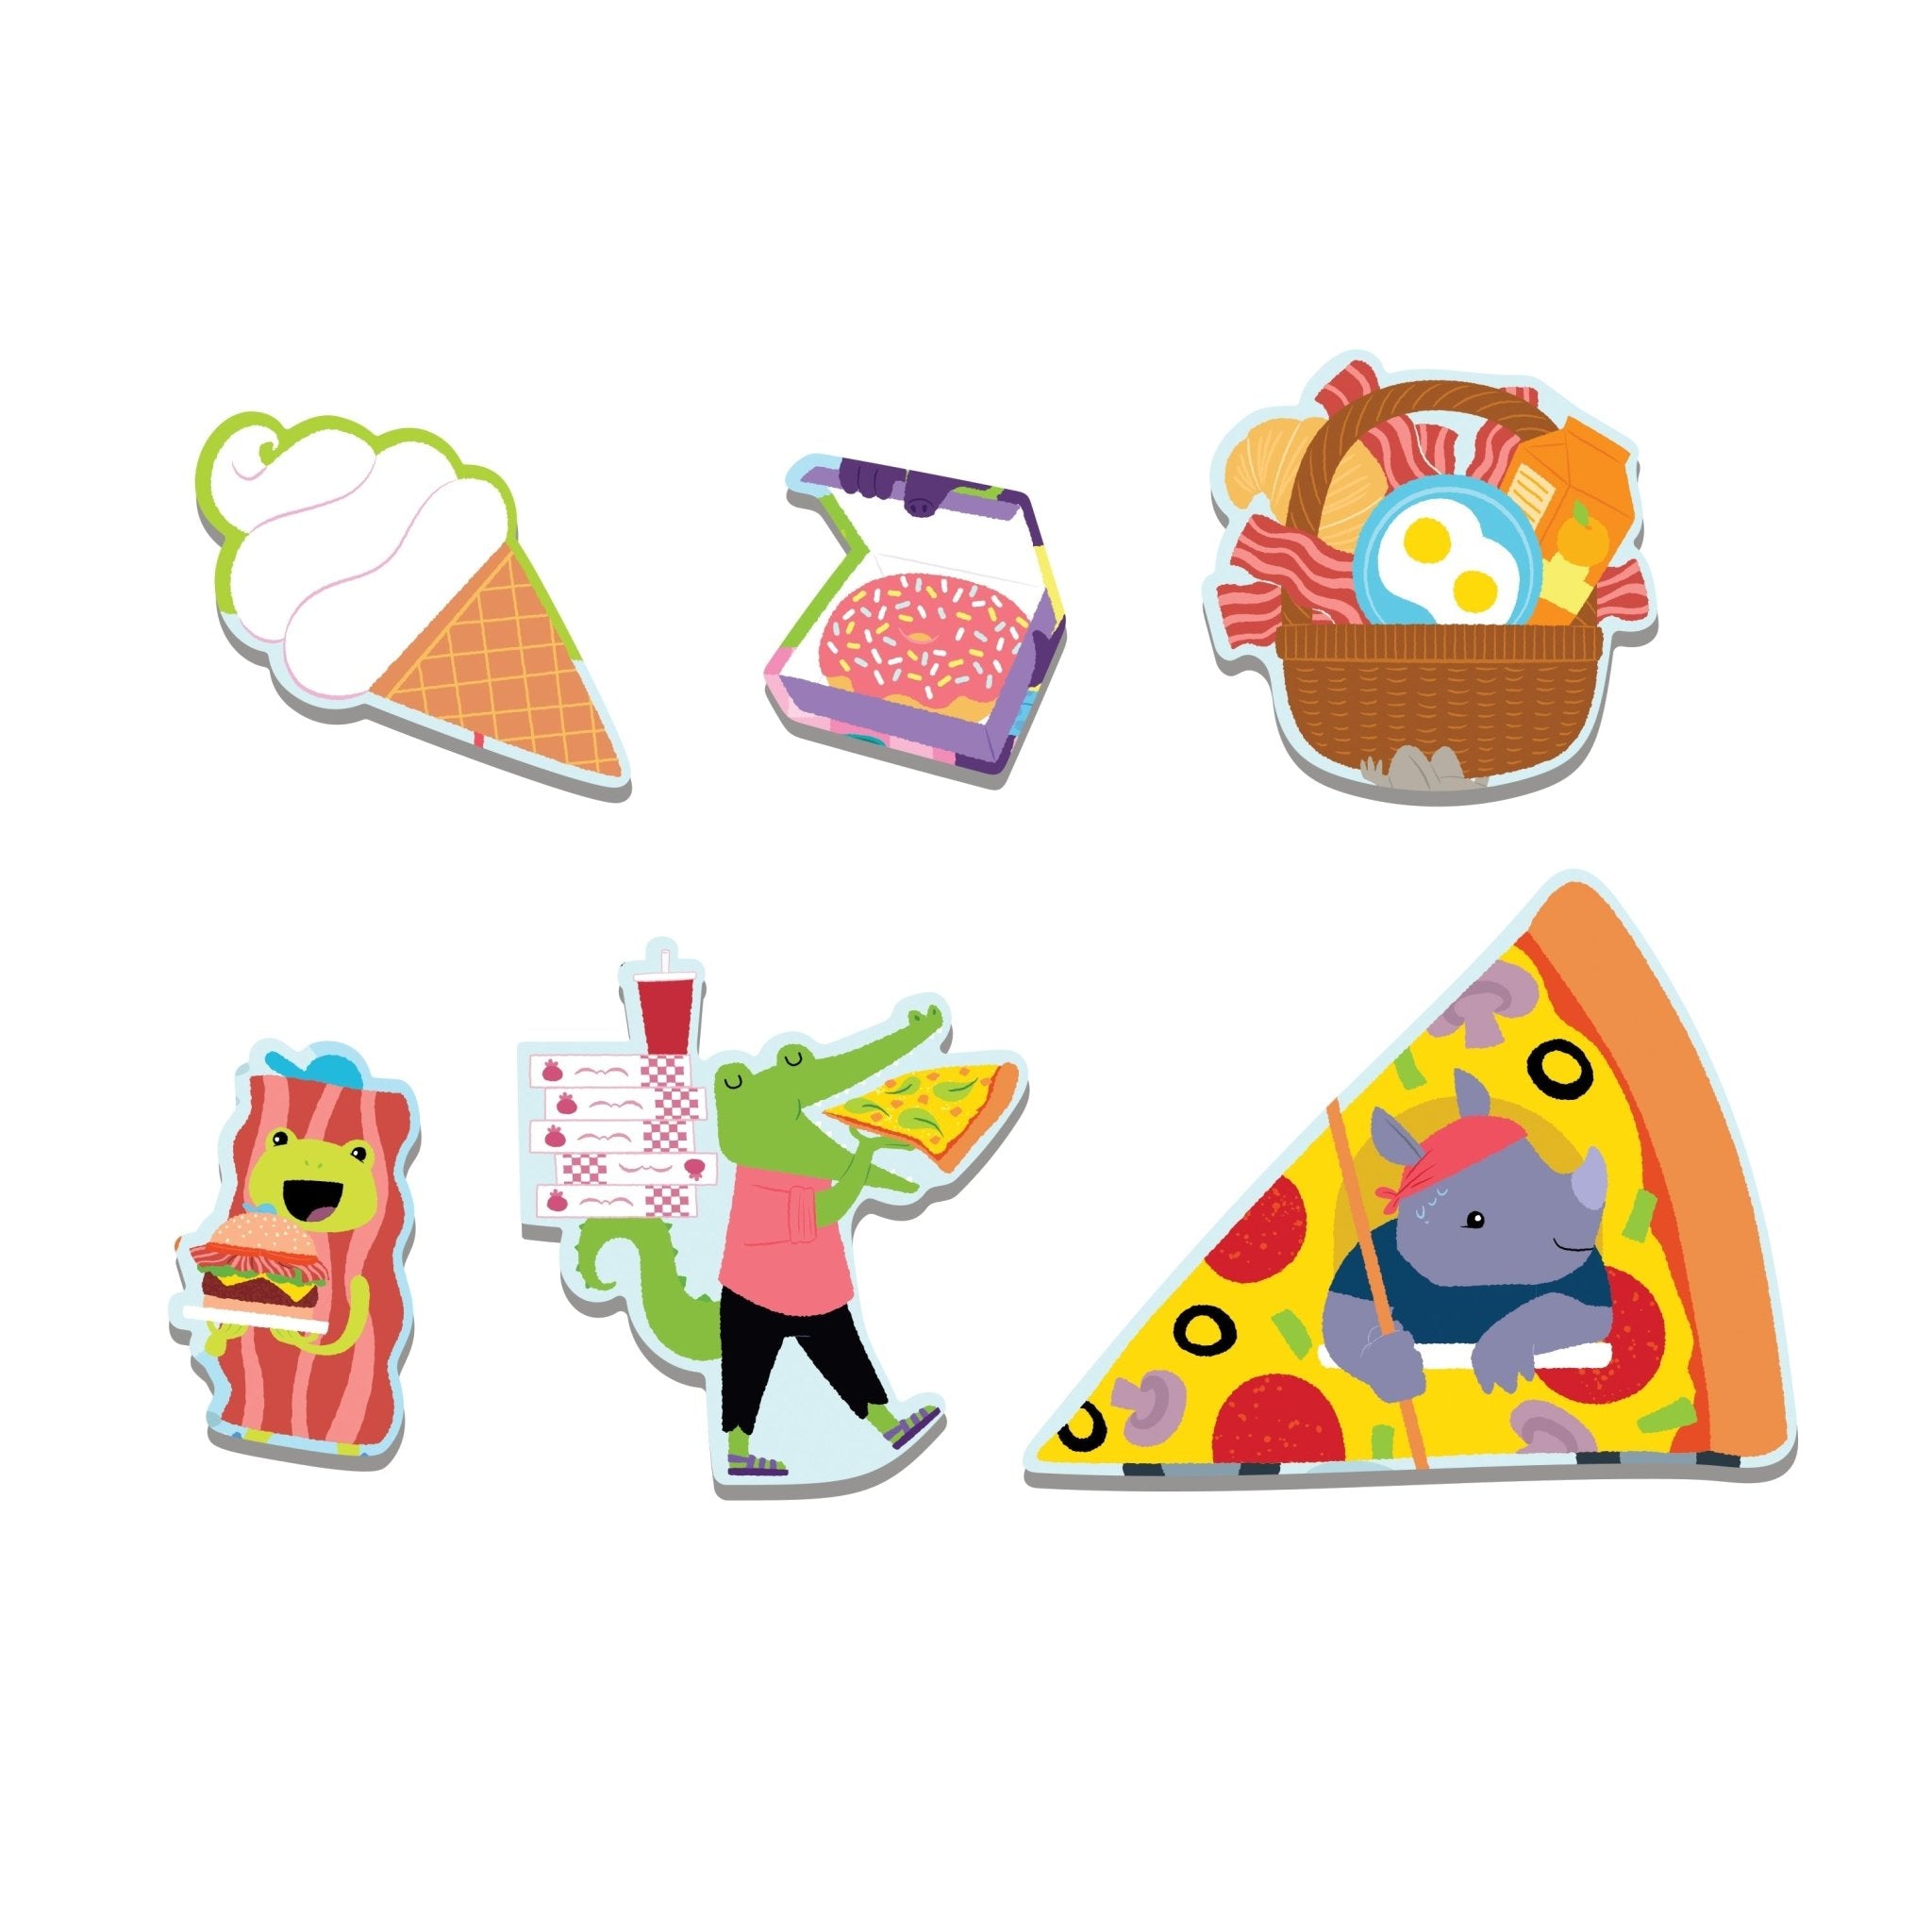 Food Festival 60 Piece Scratch and Sniff Puzzle